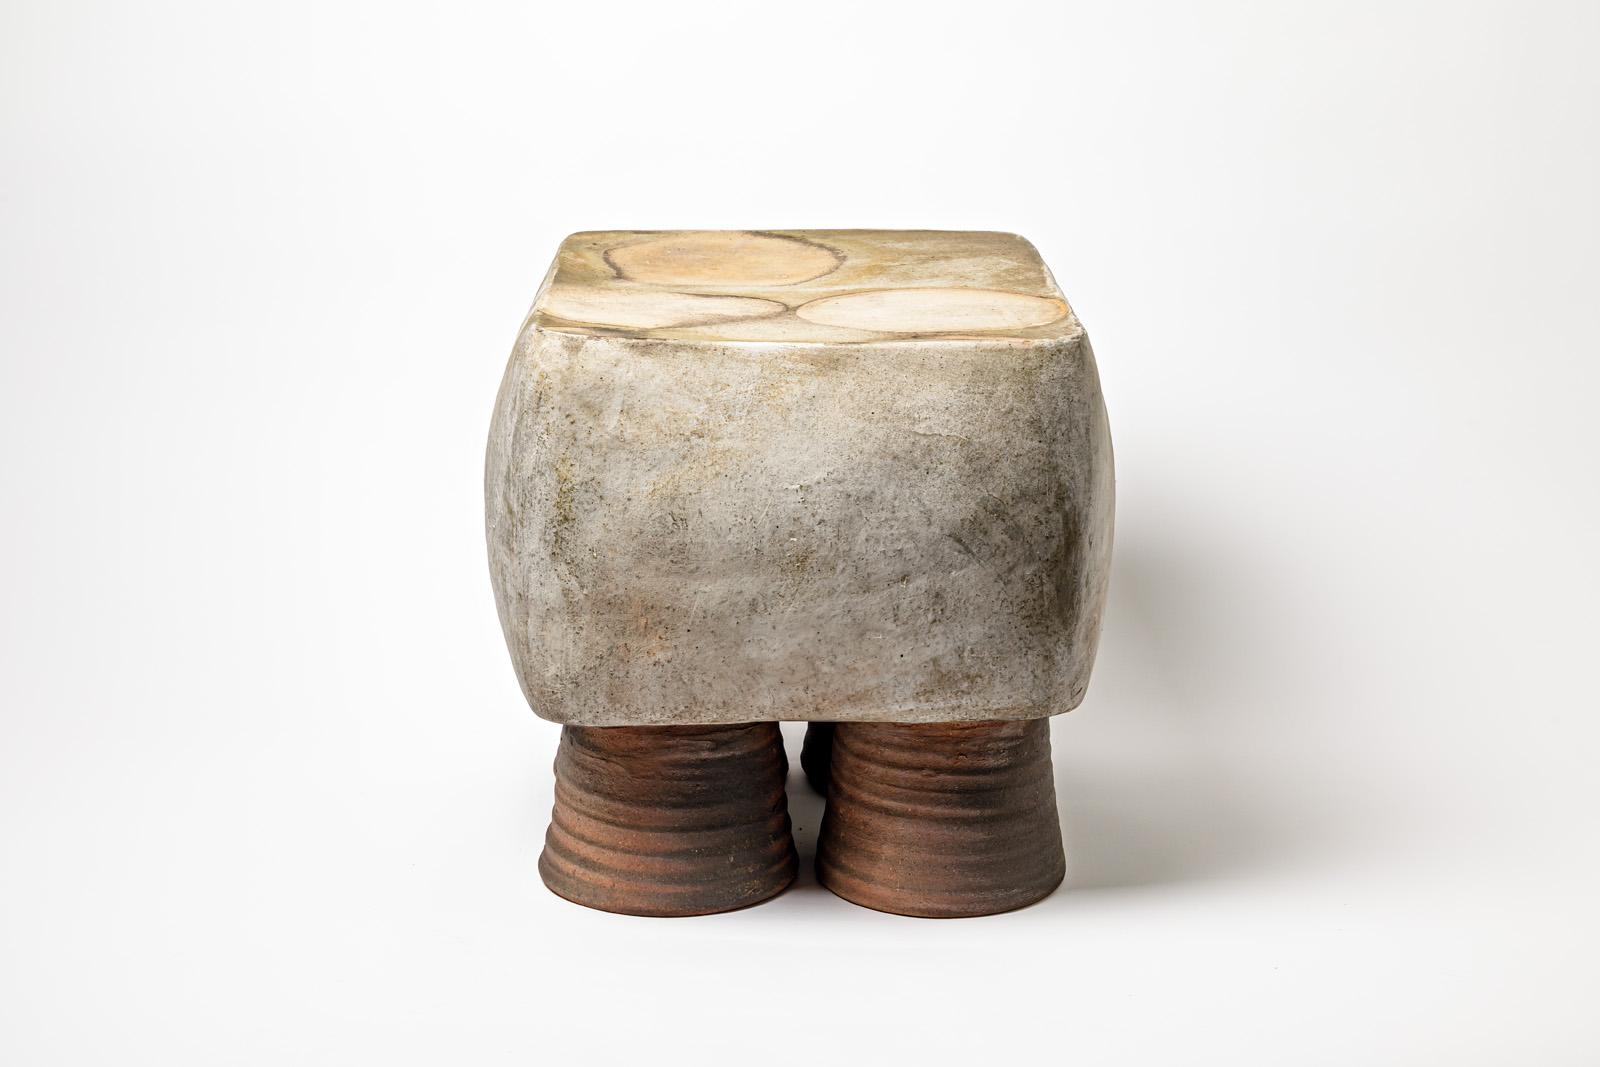 French Wood Fired Ceramic Stool or Coffee Table by Mia Jensen, 2023